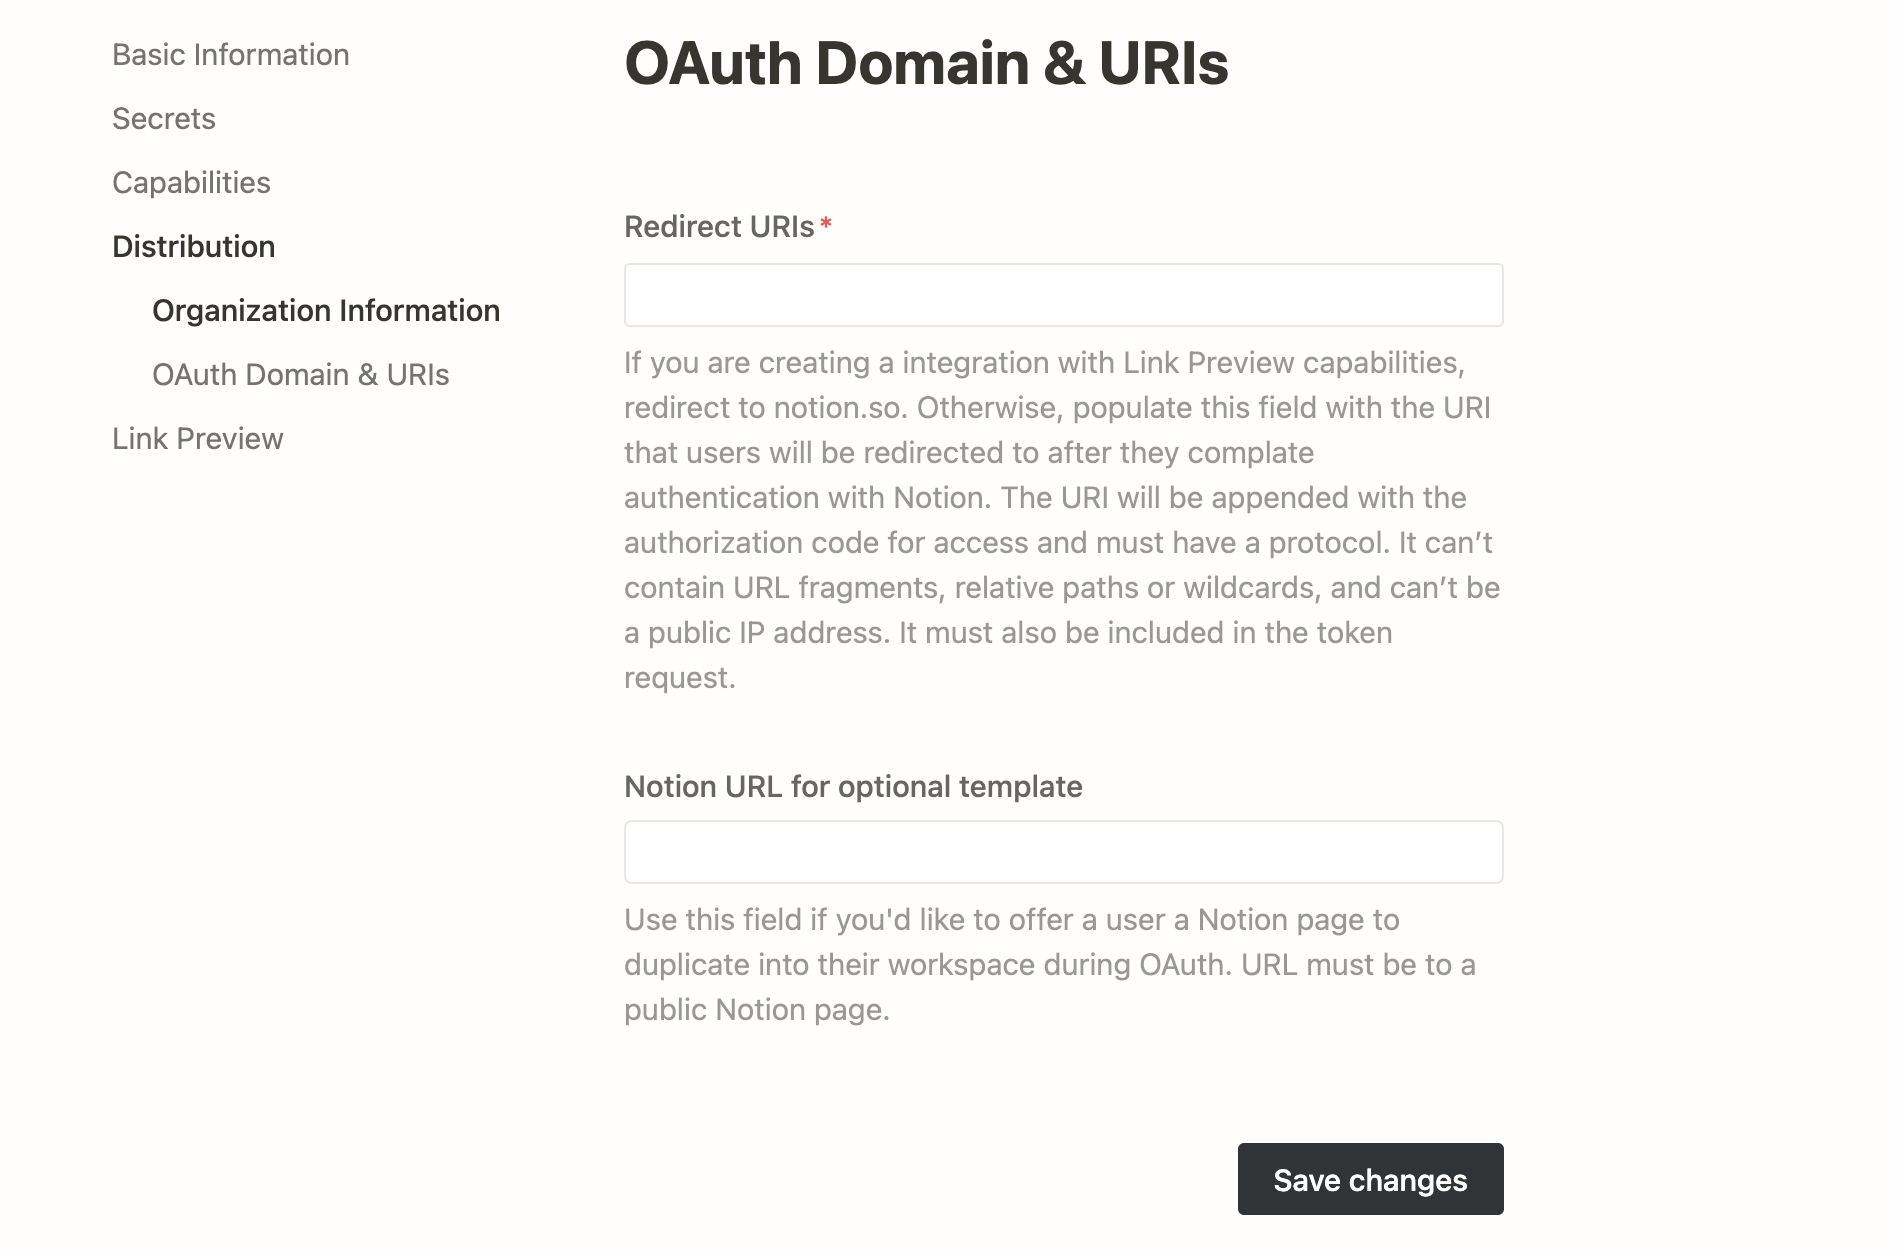 Notion URL for optional template input in integration settings.